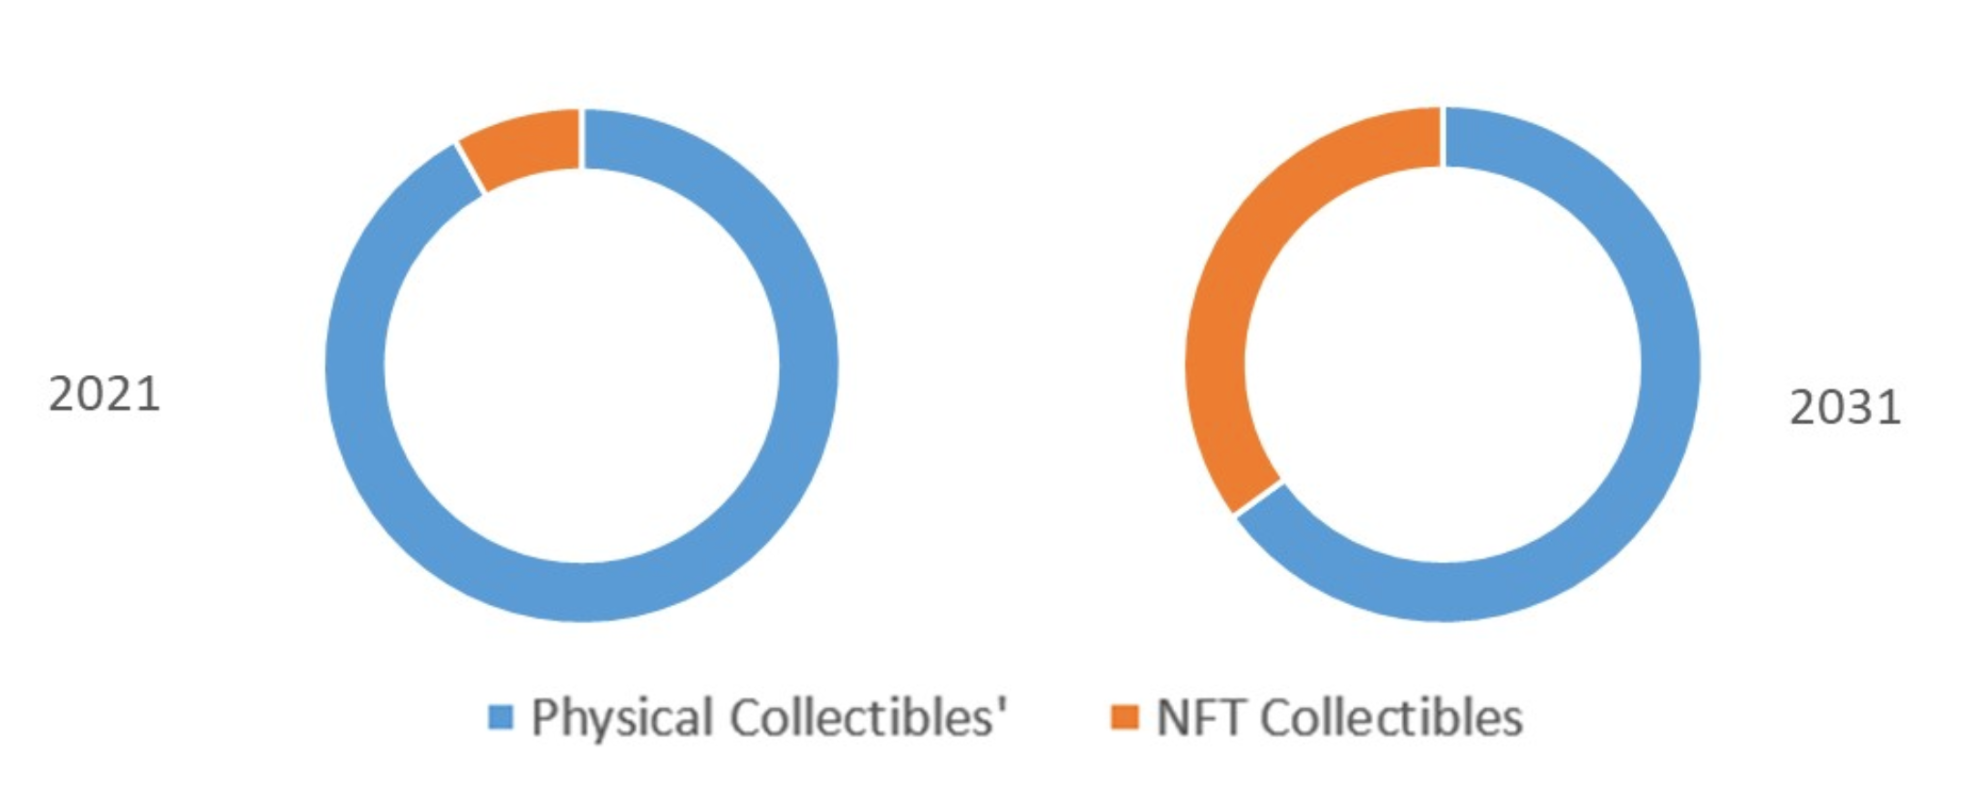 Projected Market Share for NFT Collectibles by 2031